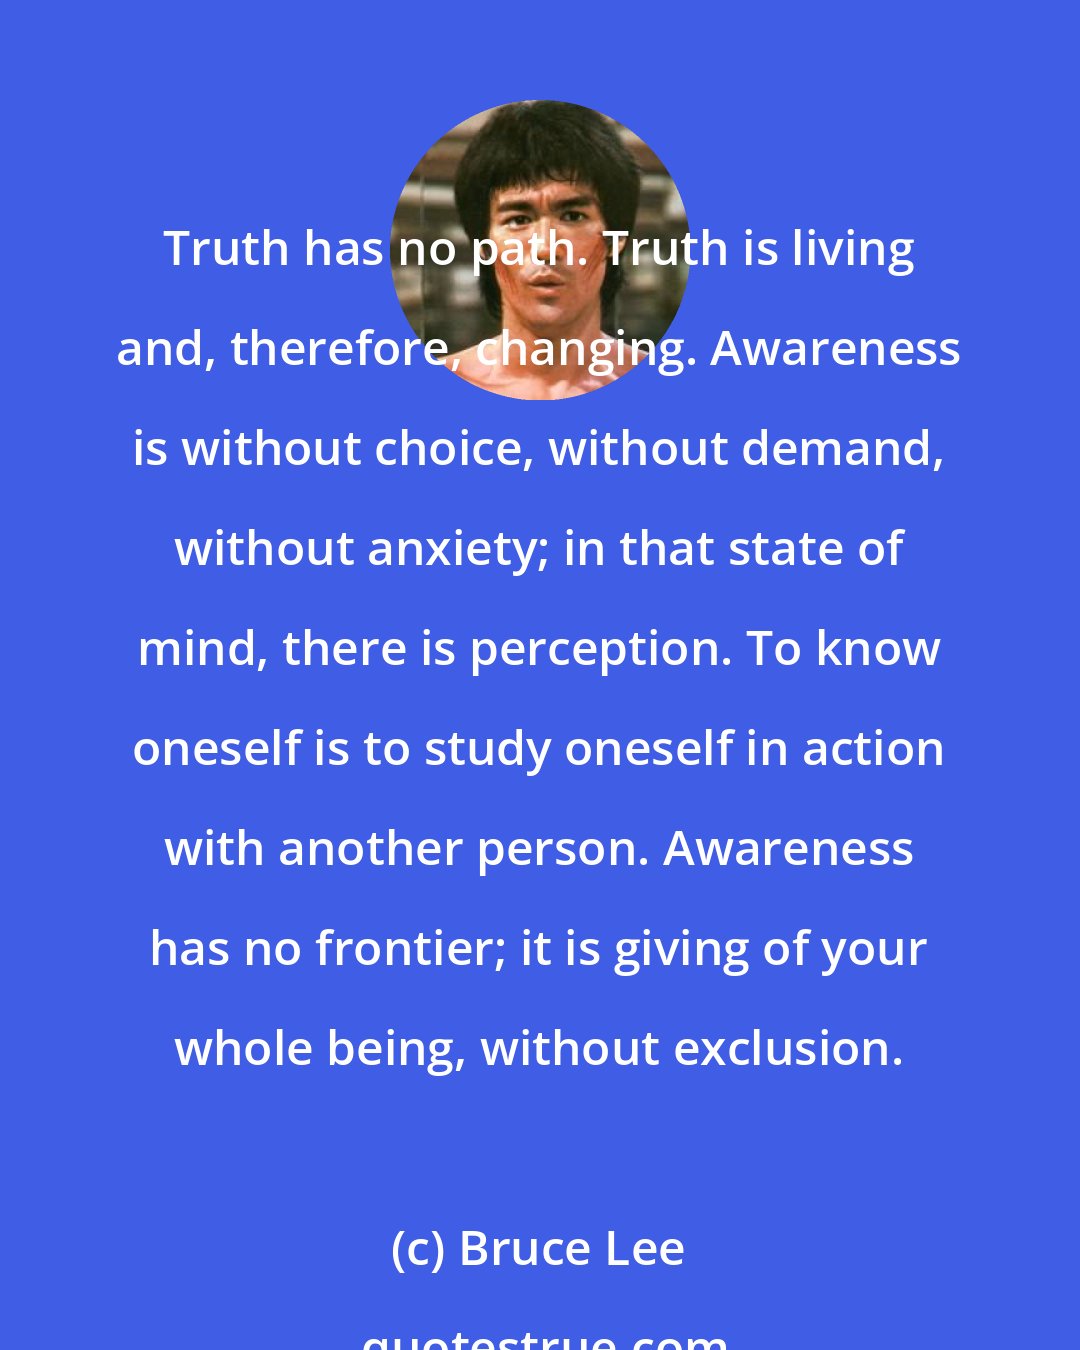 Bruce Lee: Truth has no path. Truth is living and, therefore, changing. Awareness is without choice, without demand, without anxiety; in that state of mind, there is perception. To know oneself is to study oneself in action with another person. Awareness has no frontier; it is giving of your whole being, without exclusion.